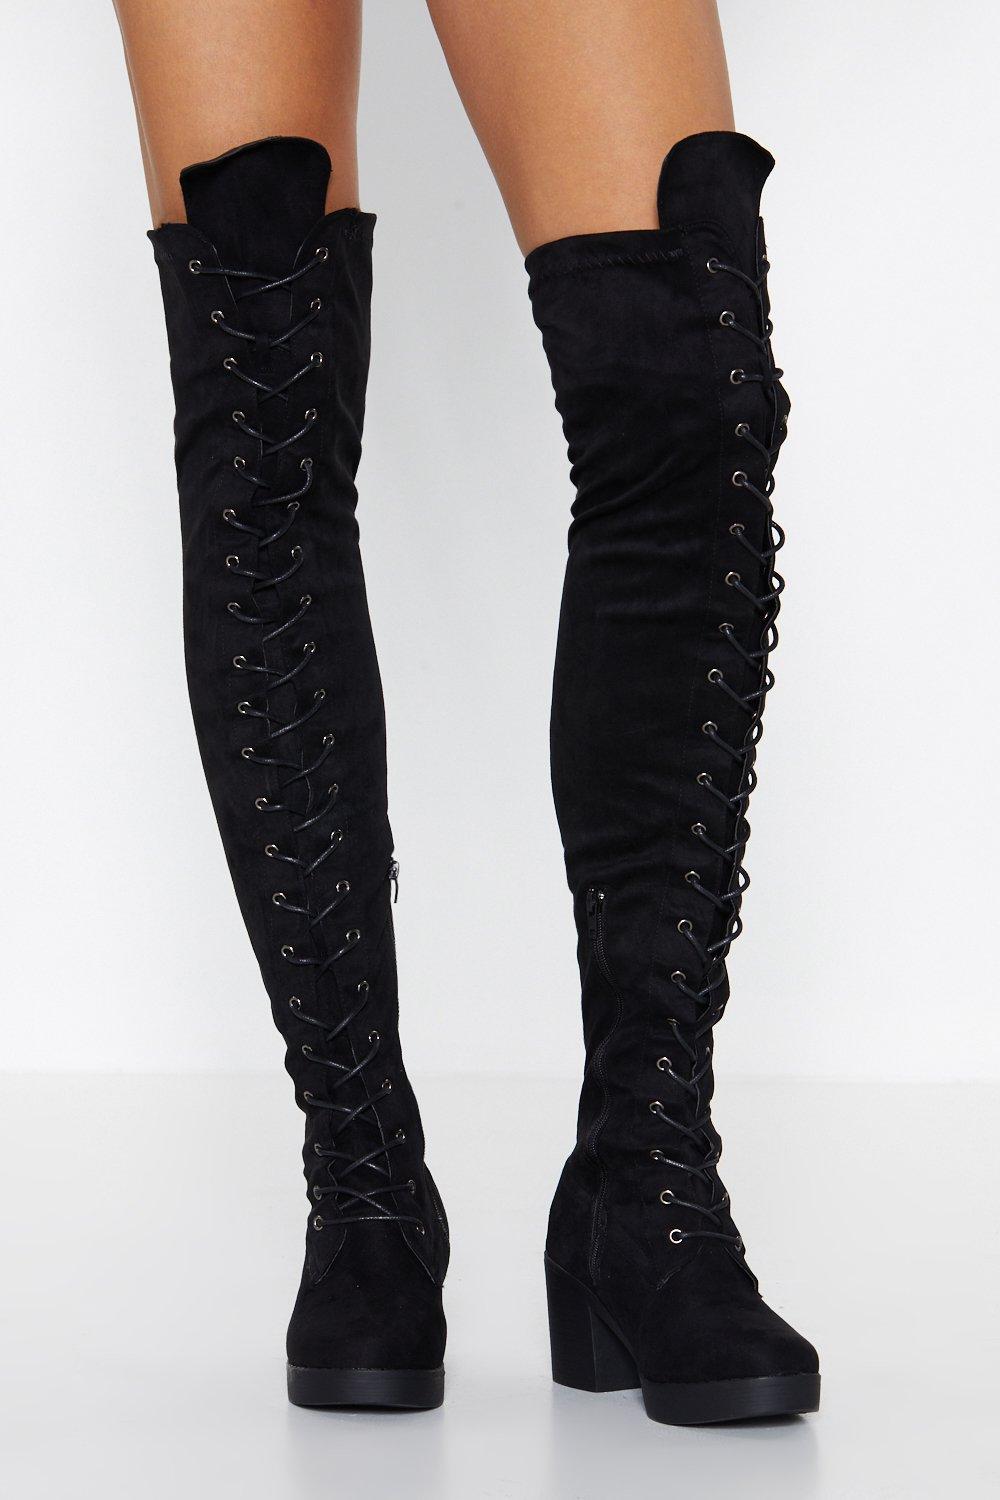 lace up over the knee boots uk